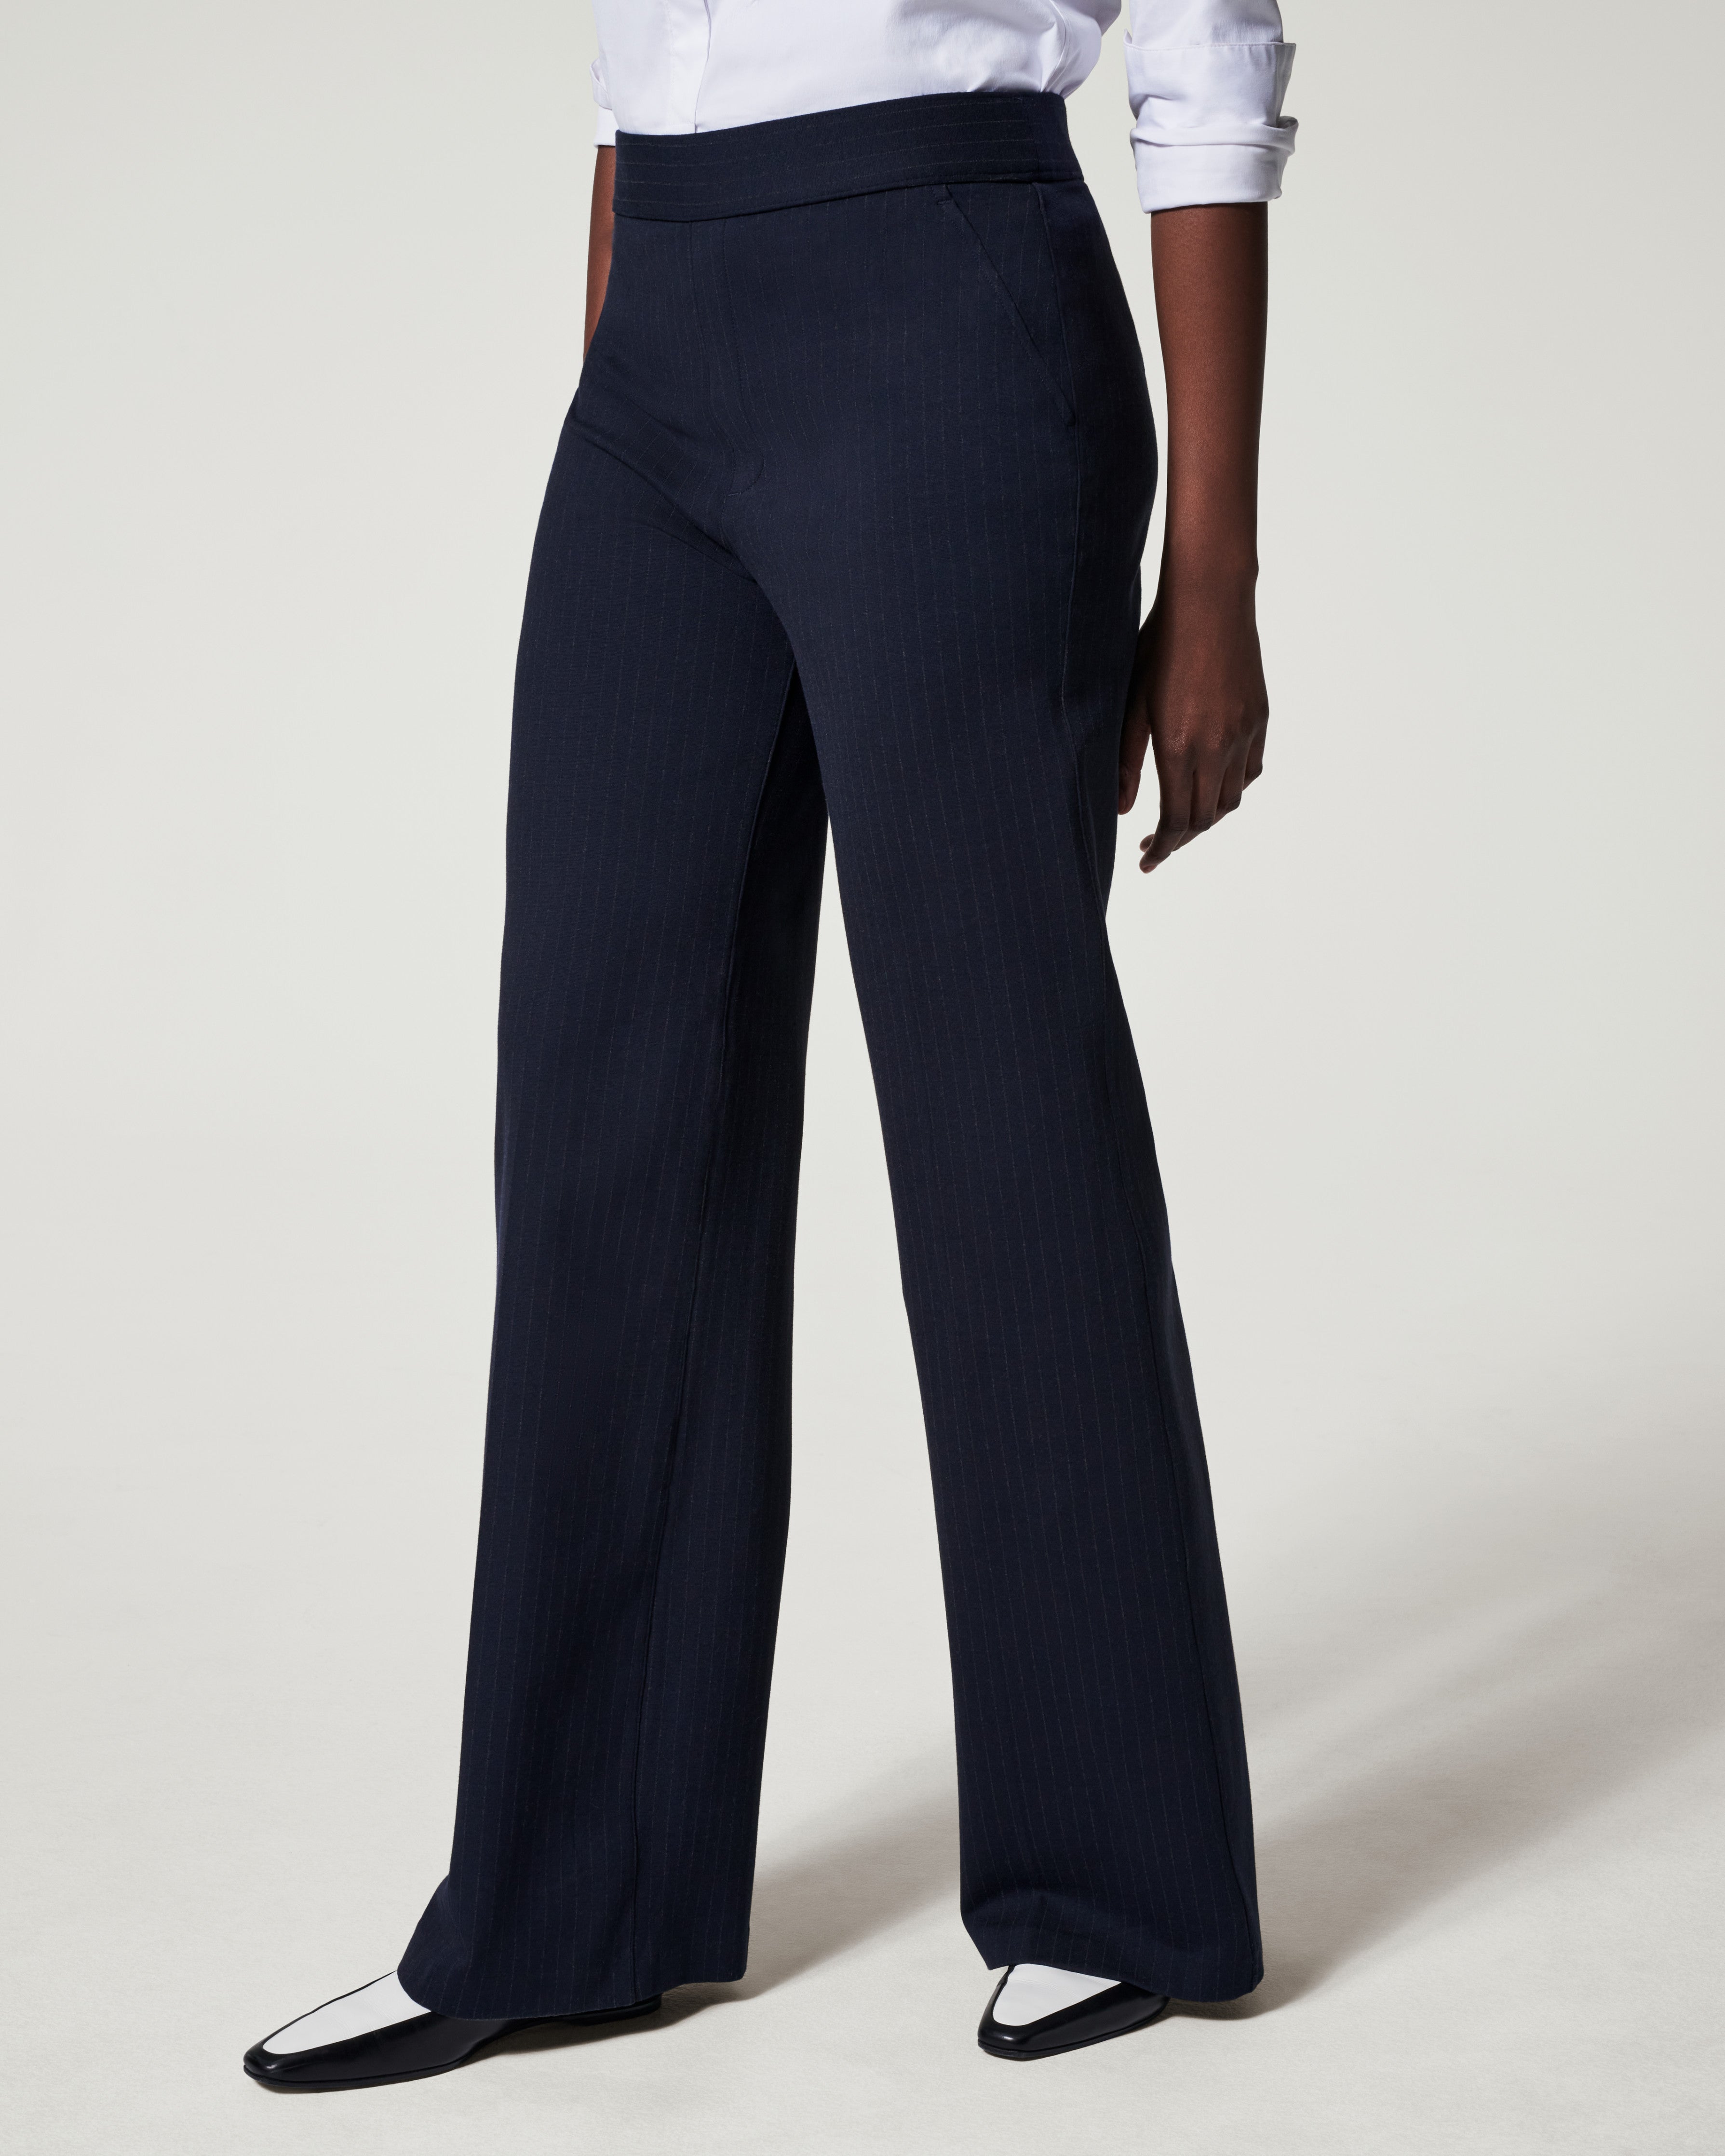 Spanx NWT The Perfect Pant, Hi-Rise Flare Charcoal Heather large - $106 -  From J